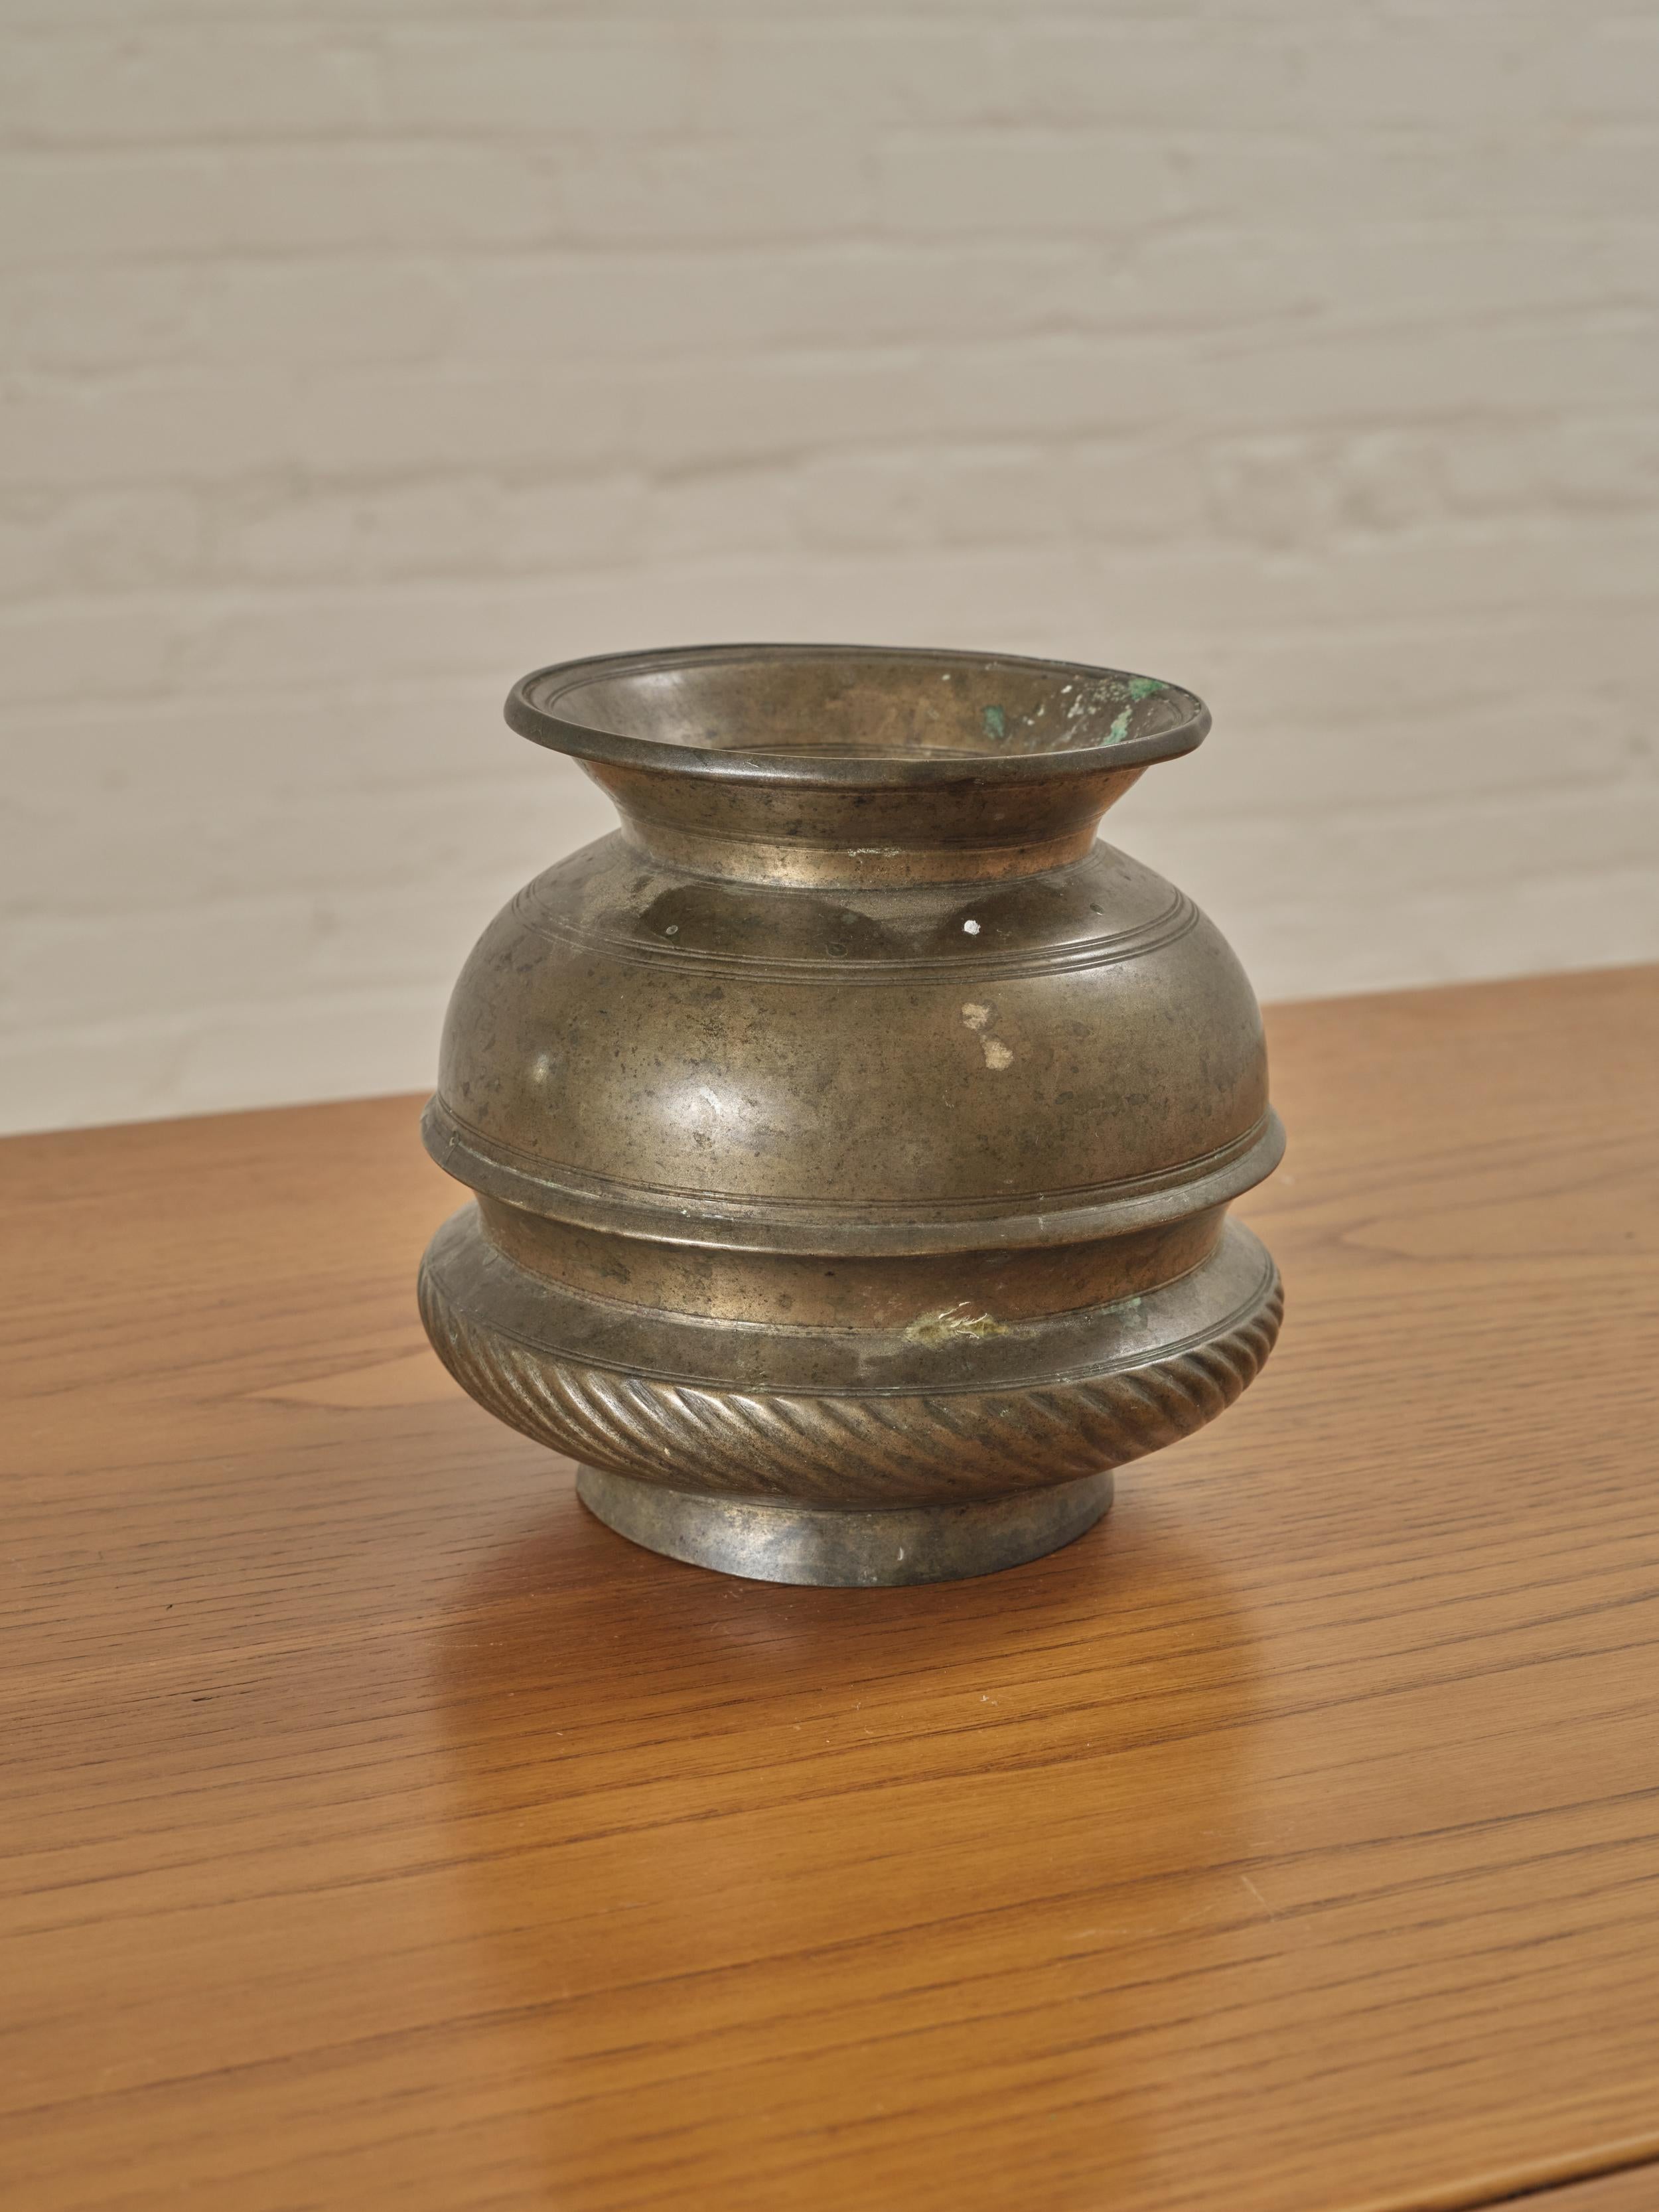 Antique Bronze Vase, also recognized as a drinking pot with intricate engravings.

